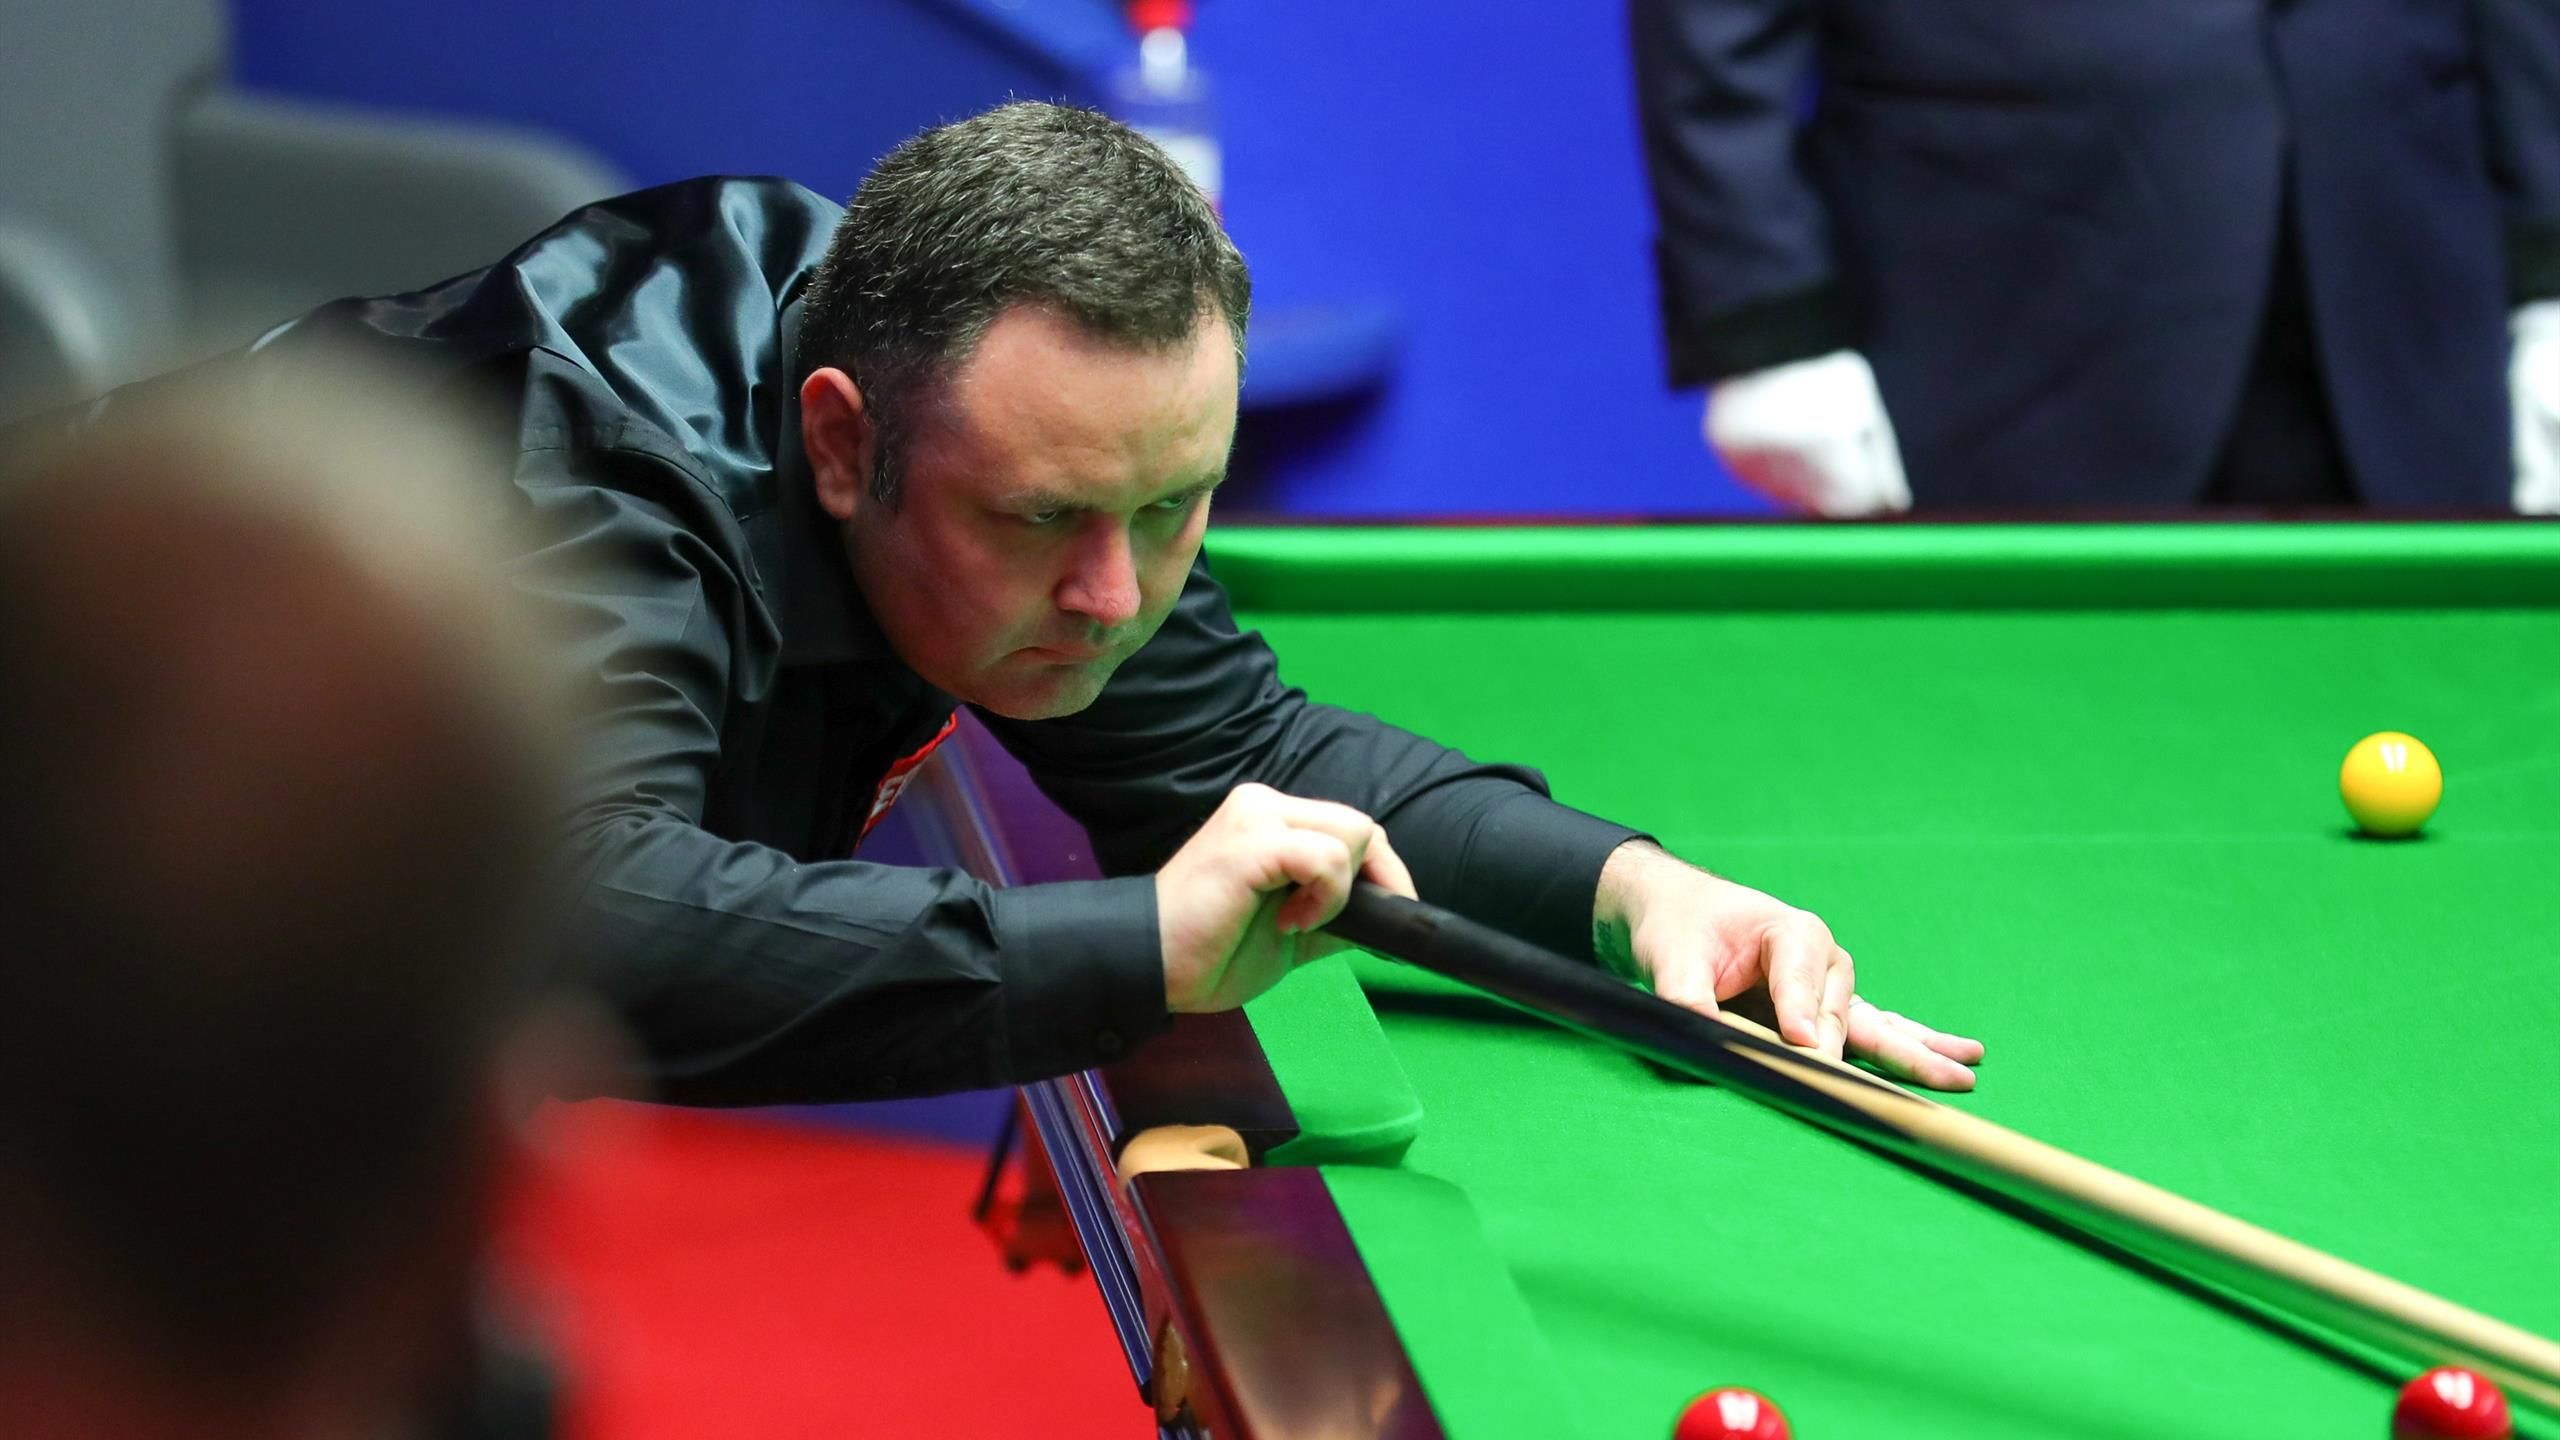 World Snooker Championship 2022 - Stephen Maguire holds off Shaun Murphy fightback to secure place in round two